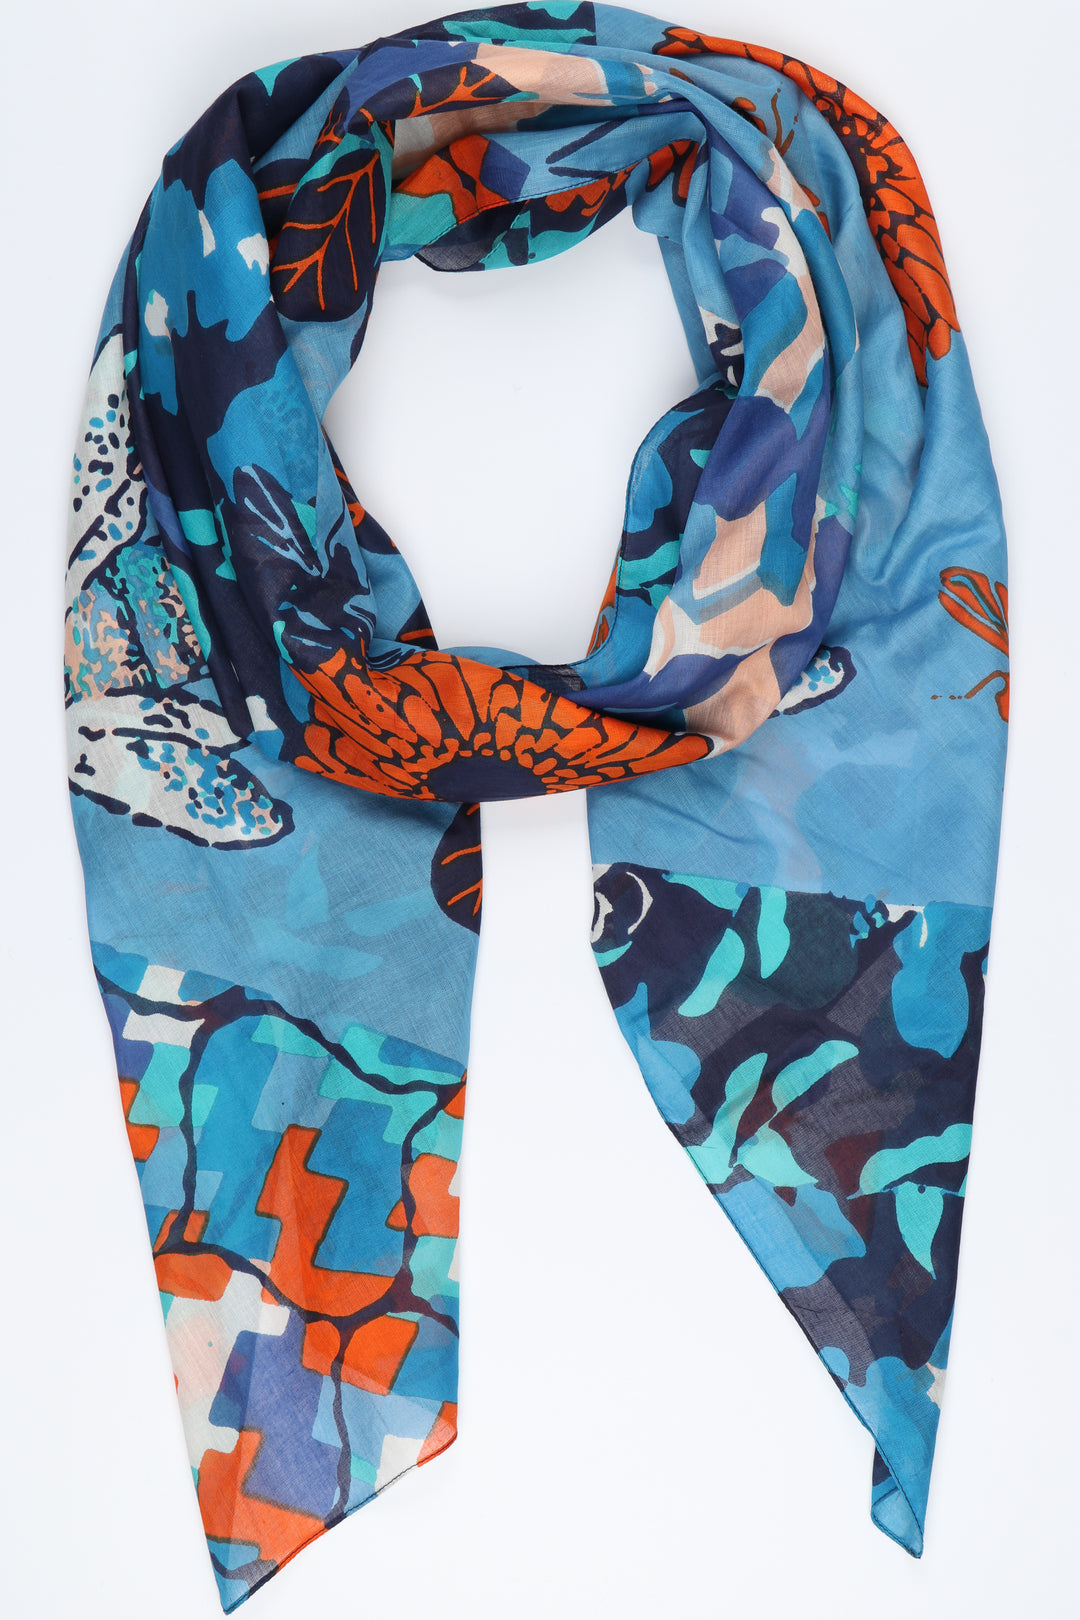 blue cotton scarf with a floral, tile and bee print pattern